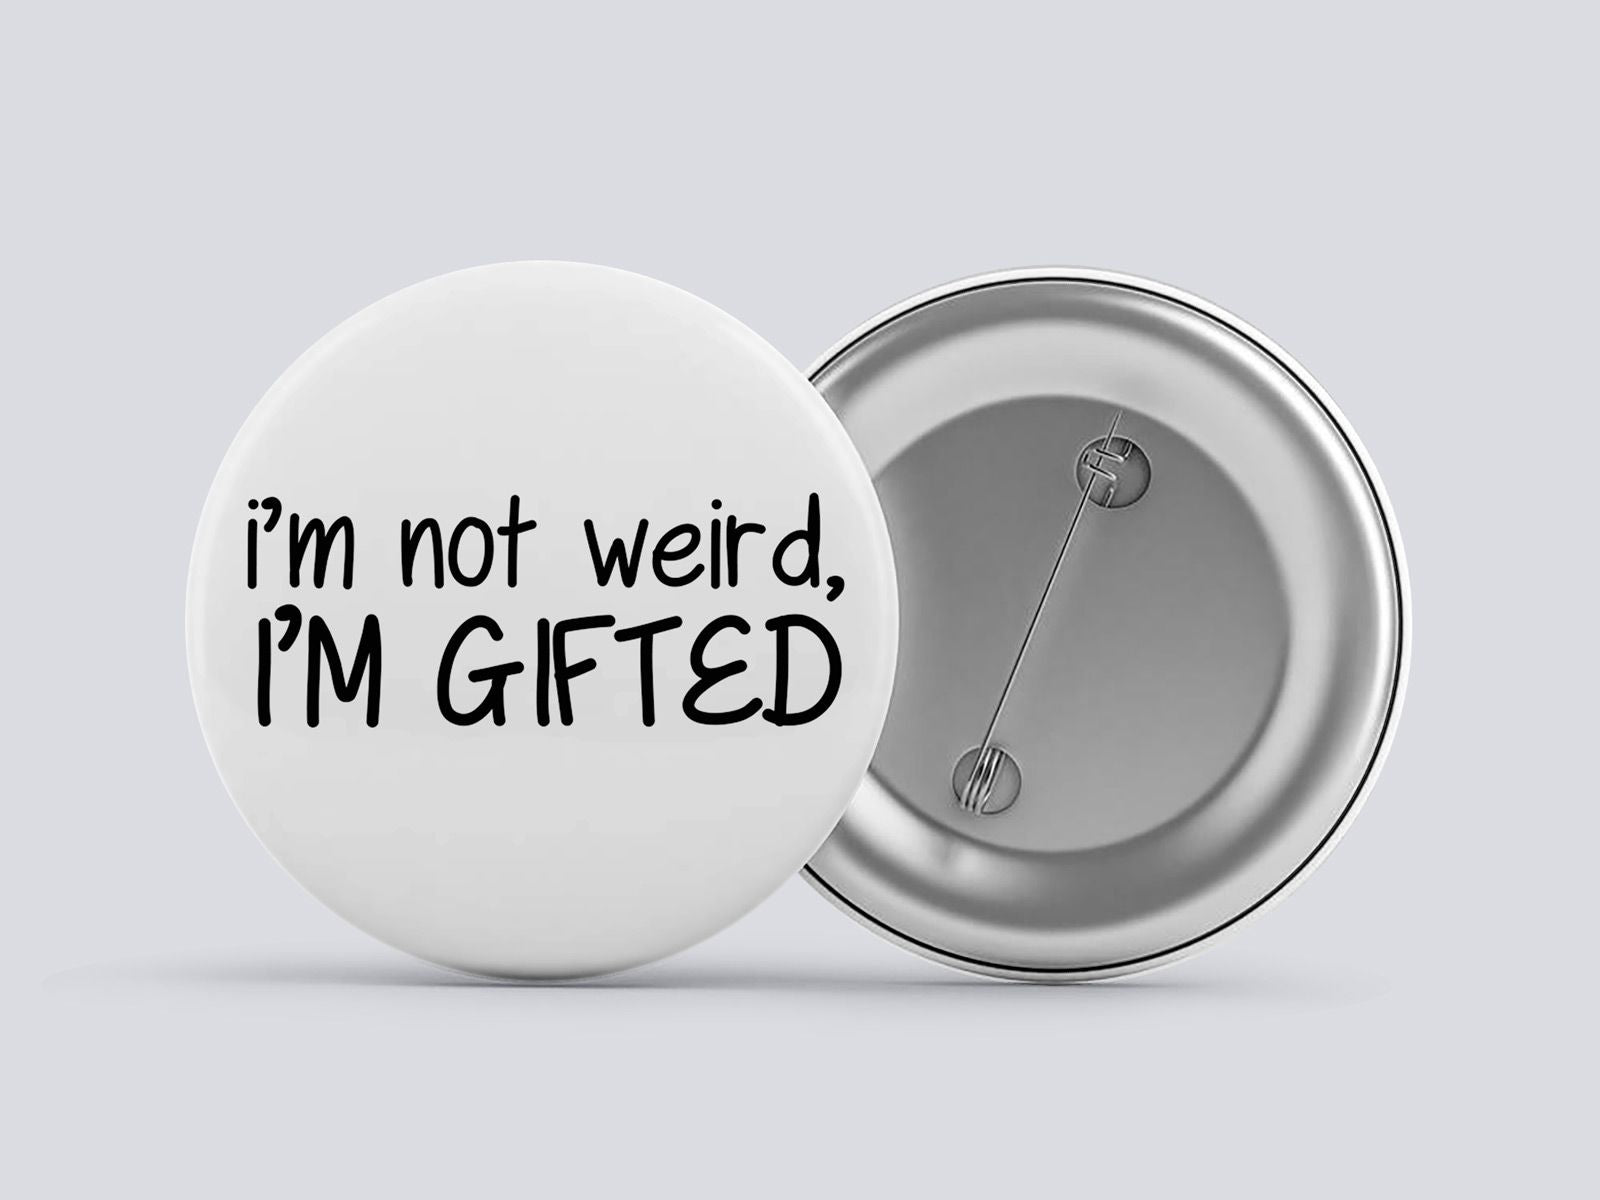 I'm Not Weird, I'm Gifted Image